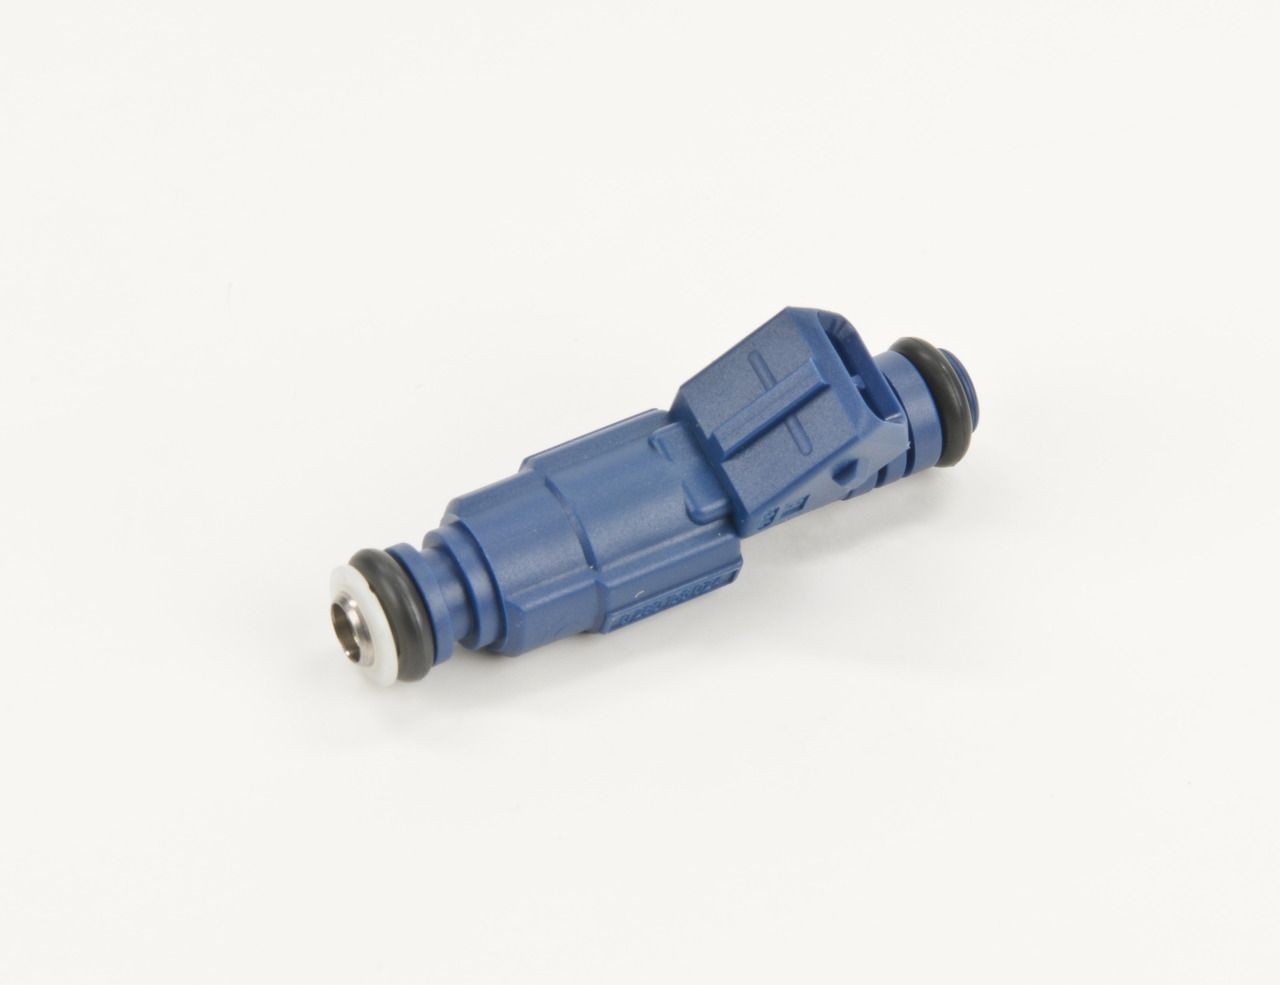 BOSCH Fuel injectors 0 280 156 024 for MG MGF, MG